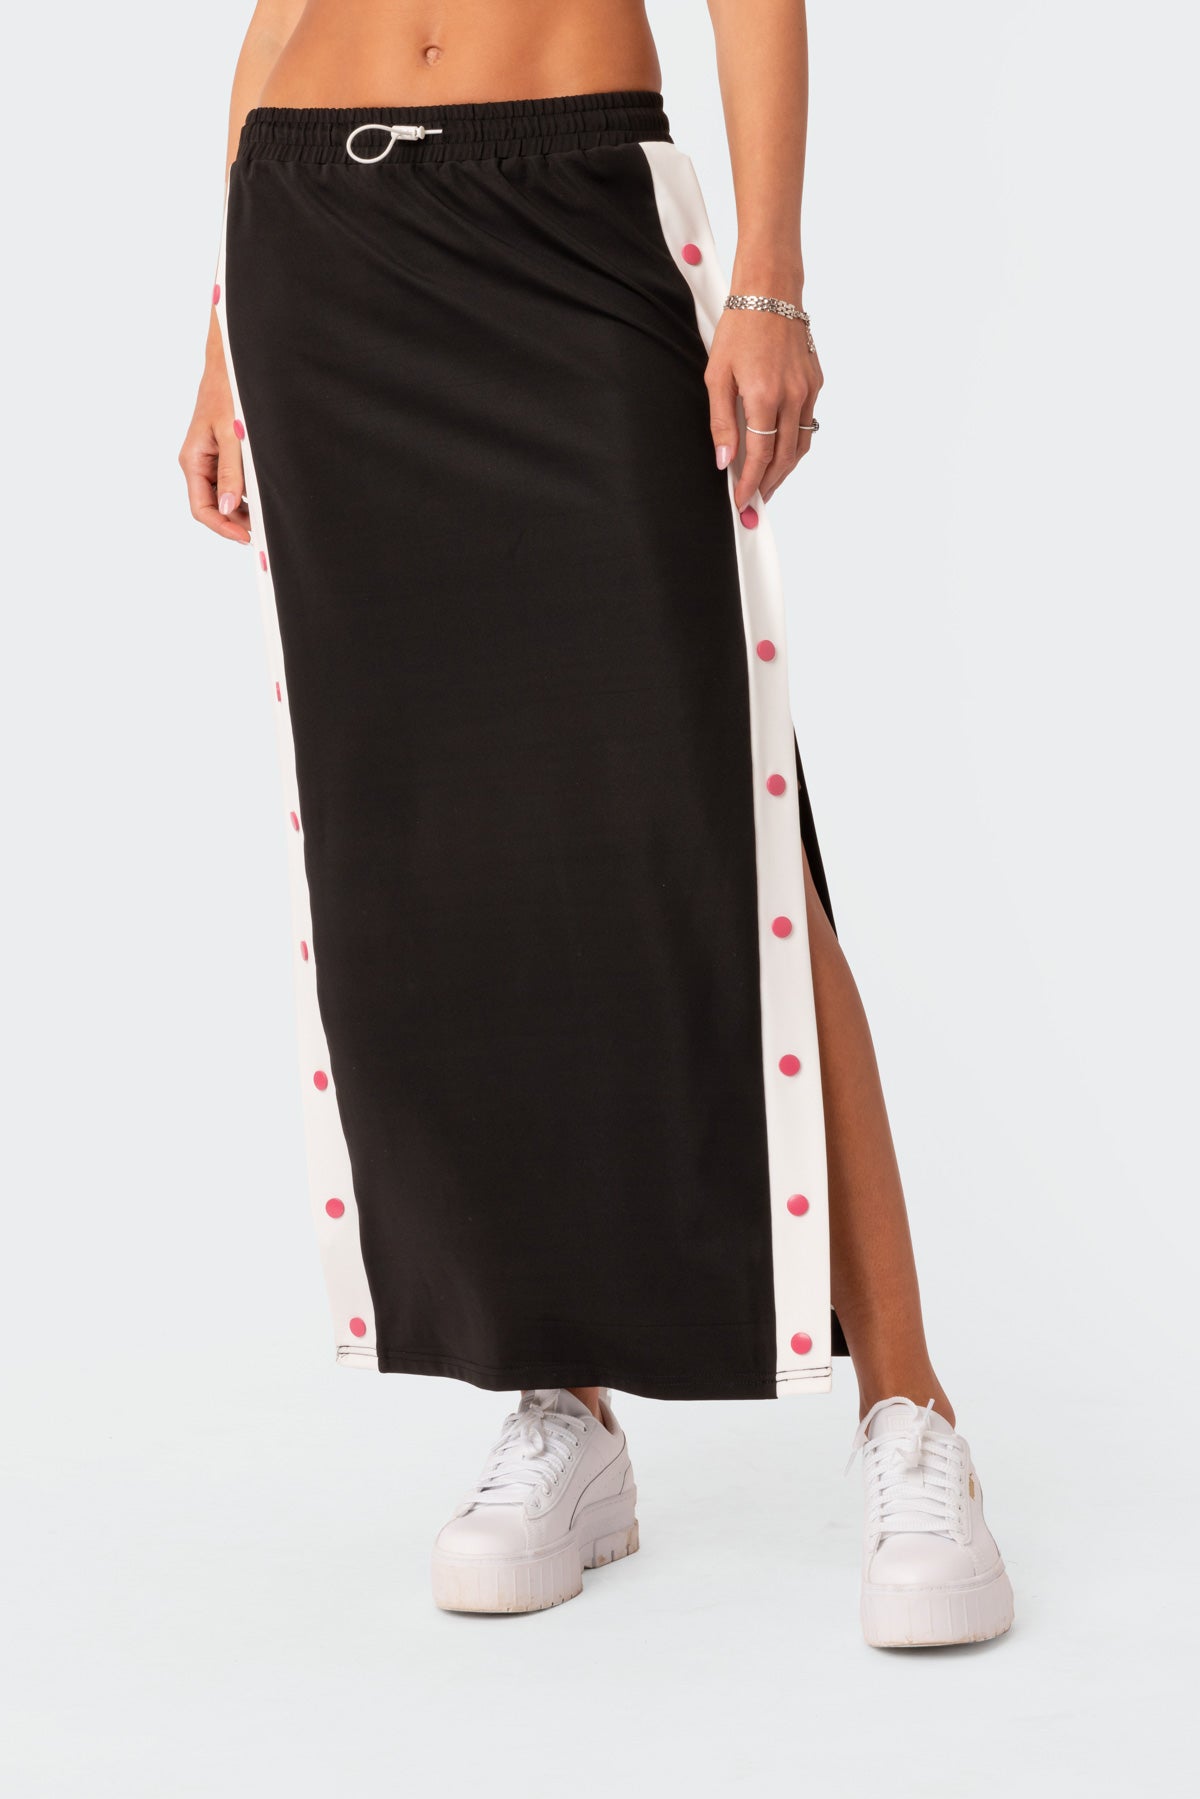 Athletic Low Rise Maxi Skirt